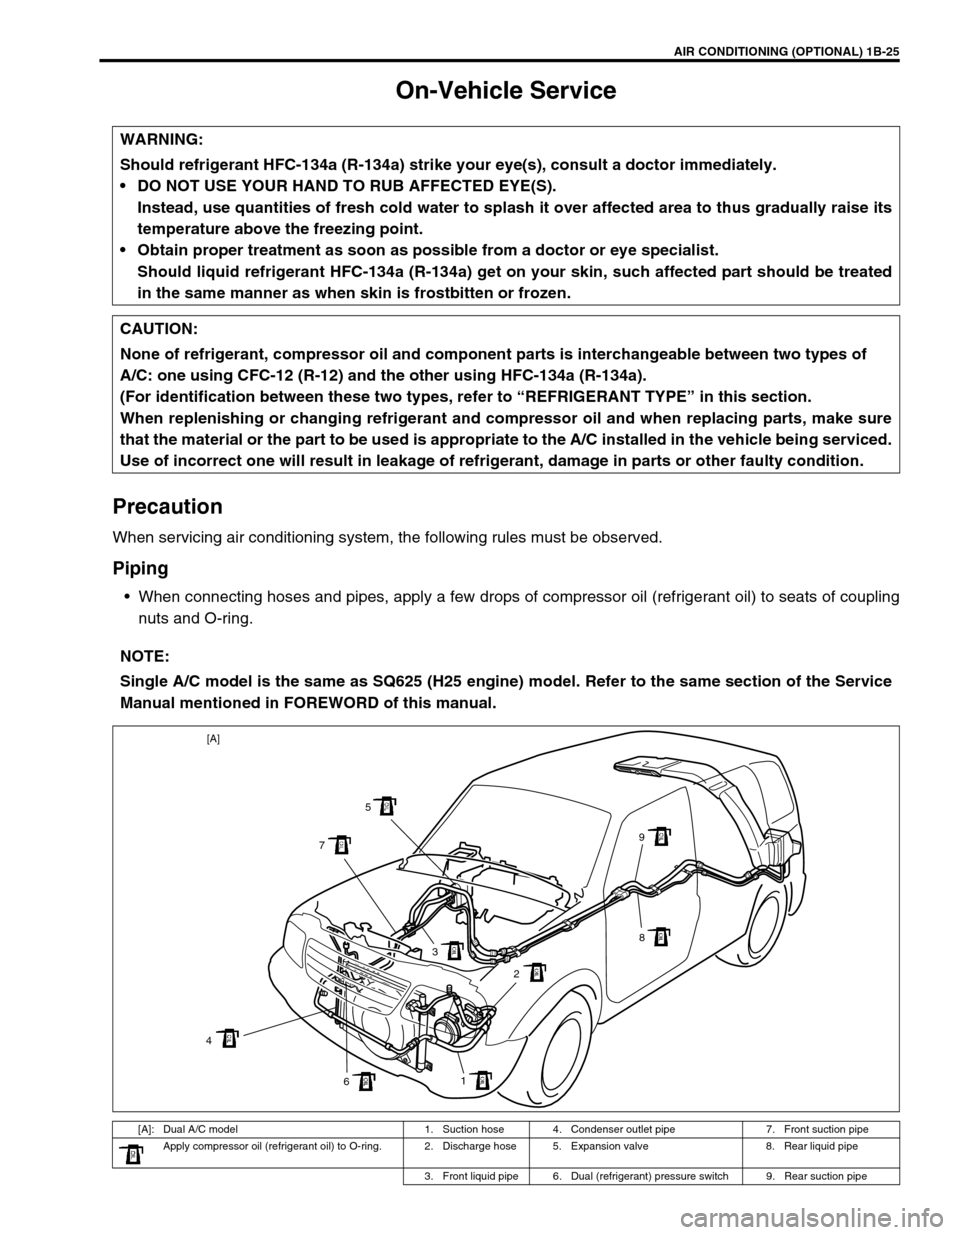 SUZUKI GRAND VITARA 2001 2.G Service Manual AIR CONDITIONING (OPTIONAL) 1B-25
On-Vehicle Service
Precaution
When servicing air conditioning system, the following rules must be observed.
Piping
When connecting hoses and pipes, apply a few drops